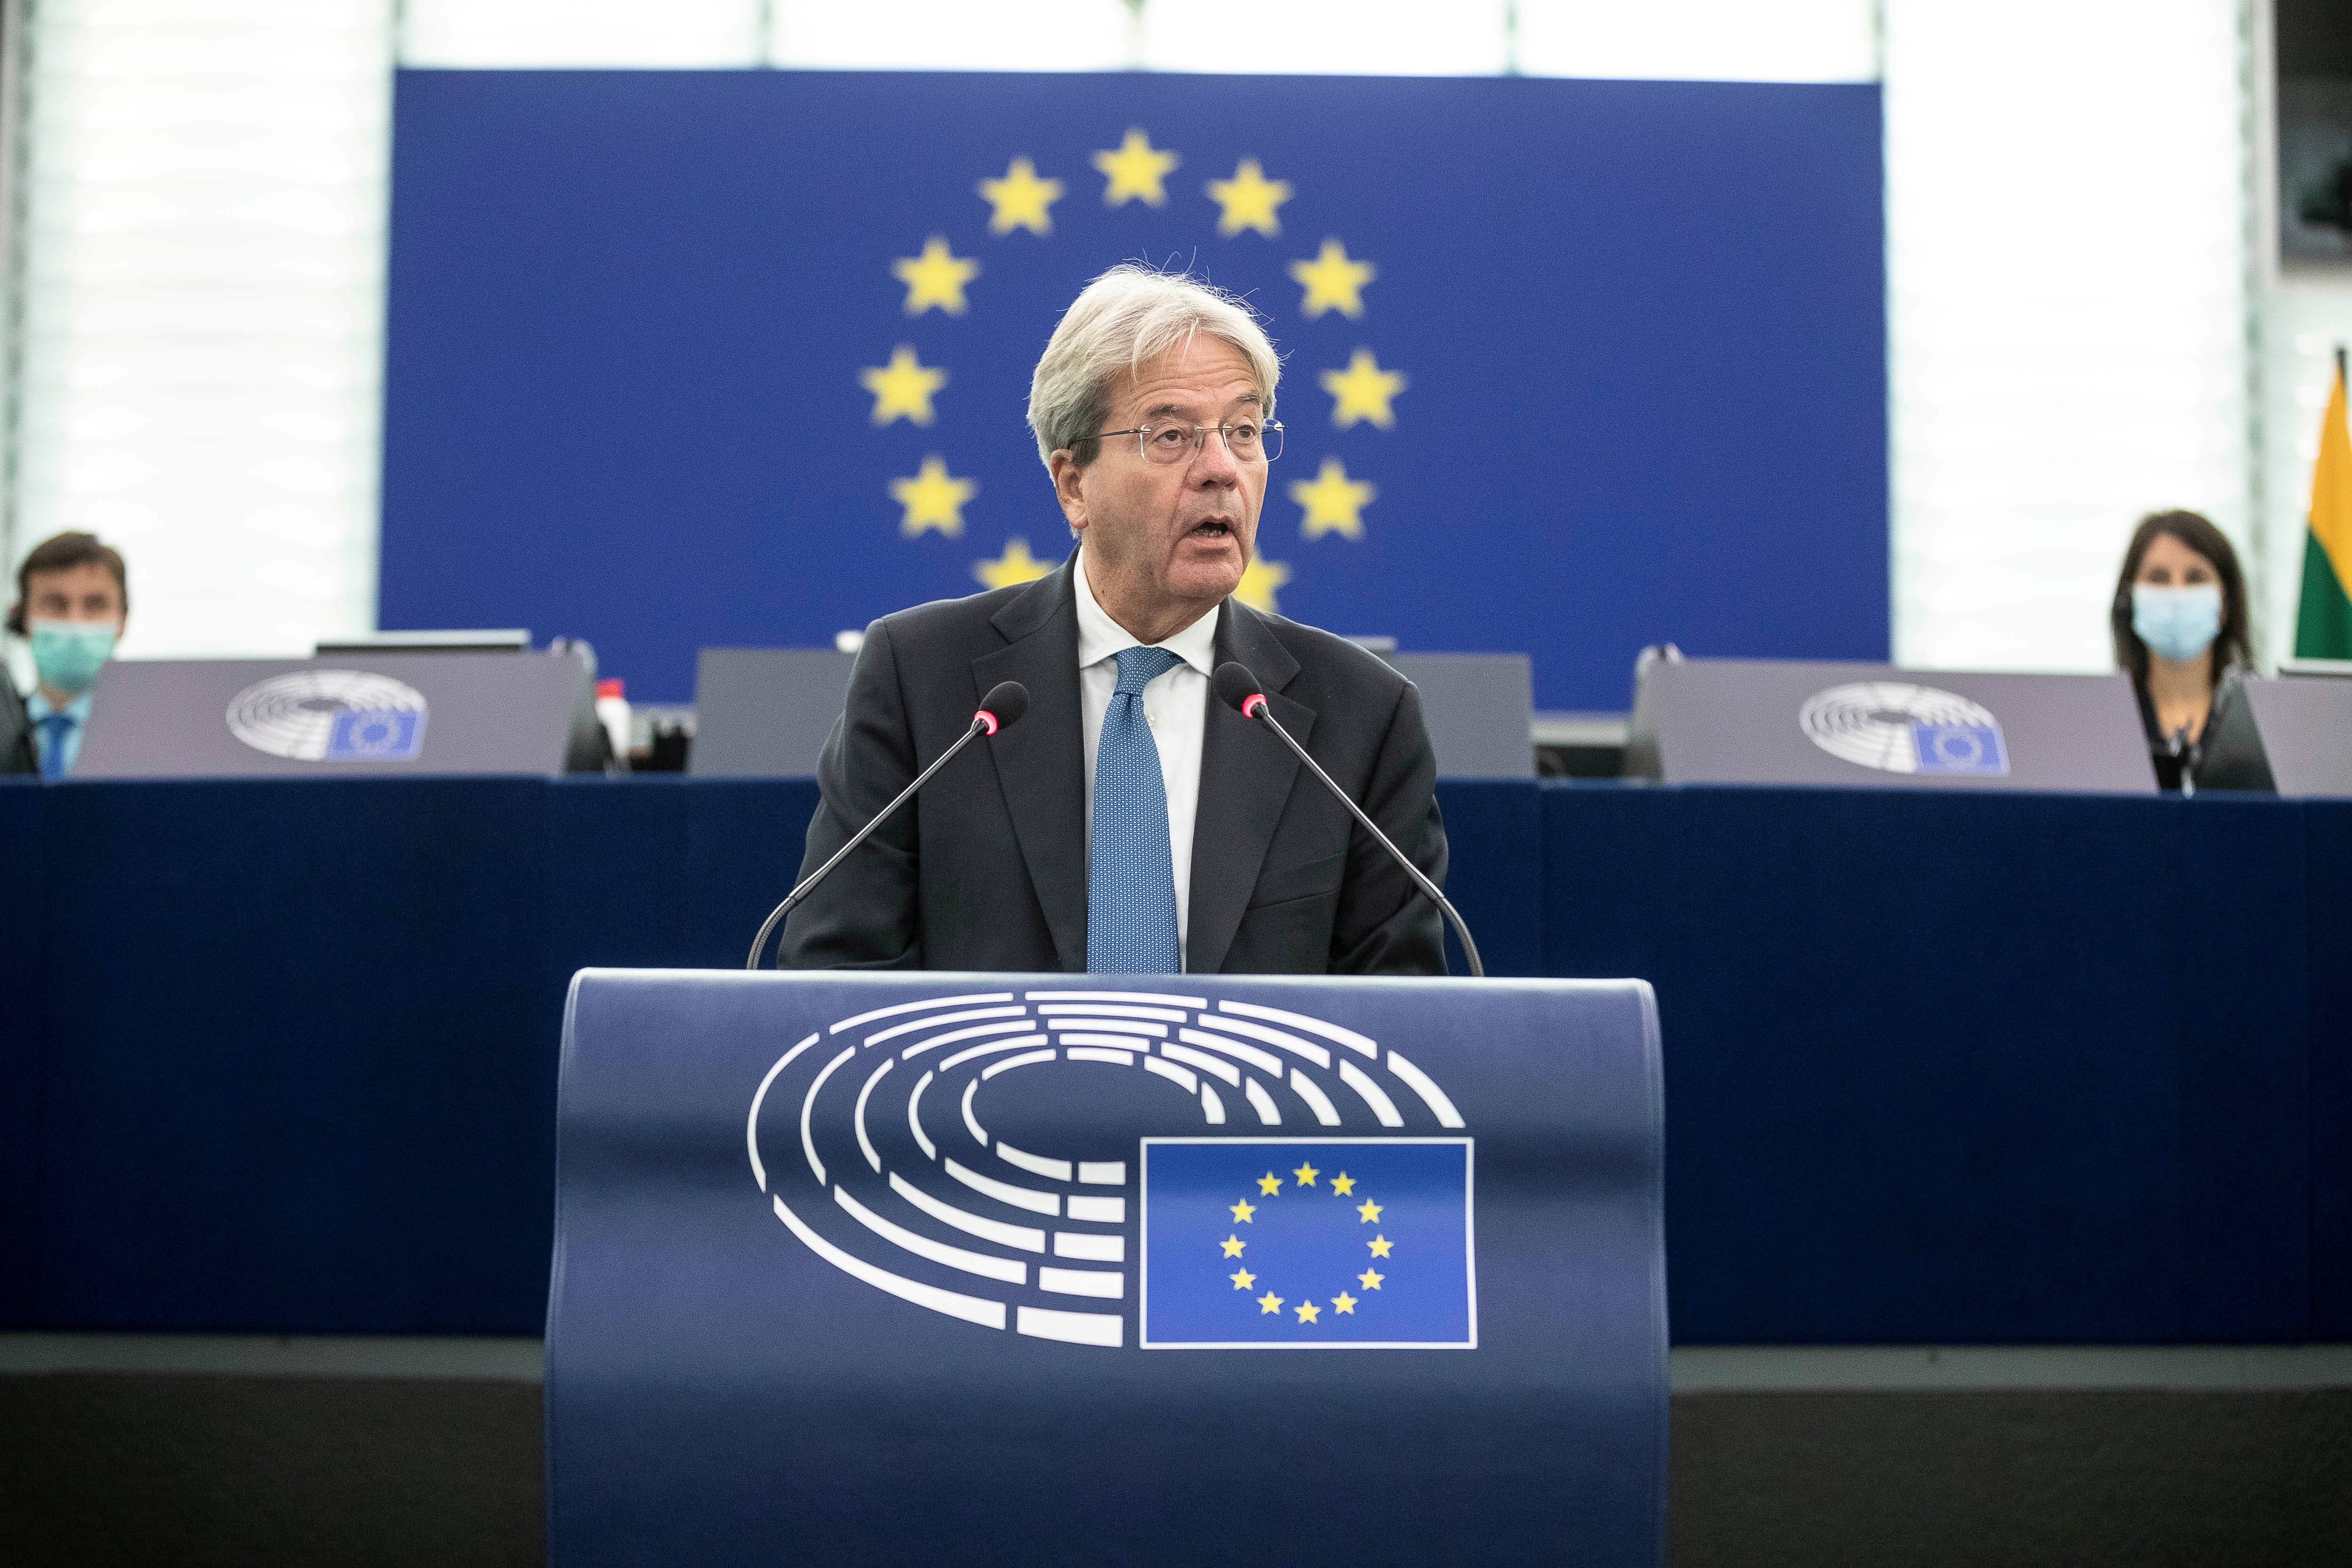 European Commissioner for Economy Paolo Gentiloni delivers his speech about the Pandora Papers and the implications on the efforts to combat money laundering, tax evasion and avoidance at the European Parliament, in Strasbourg, France October 6, 2021. Jean-Francois Badias/Pool via REUTERS